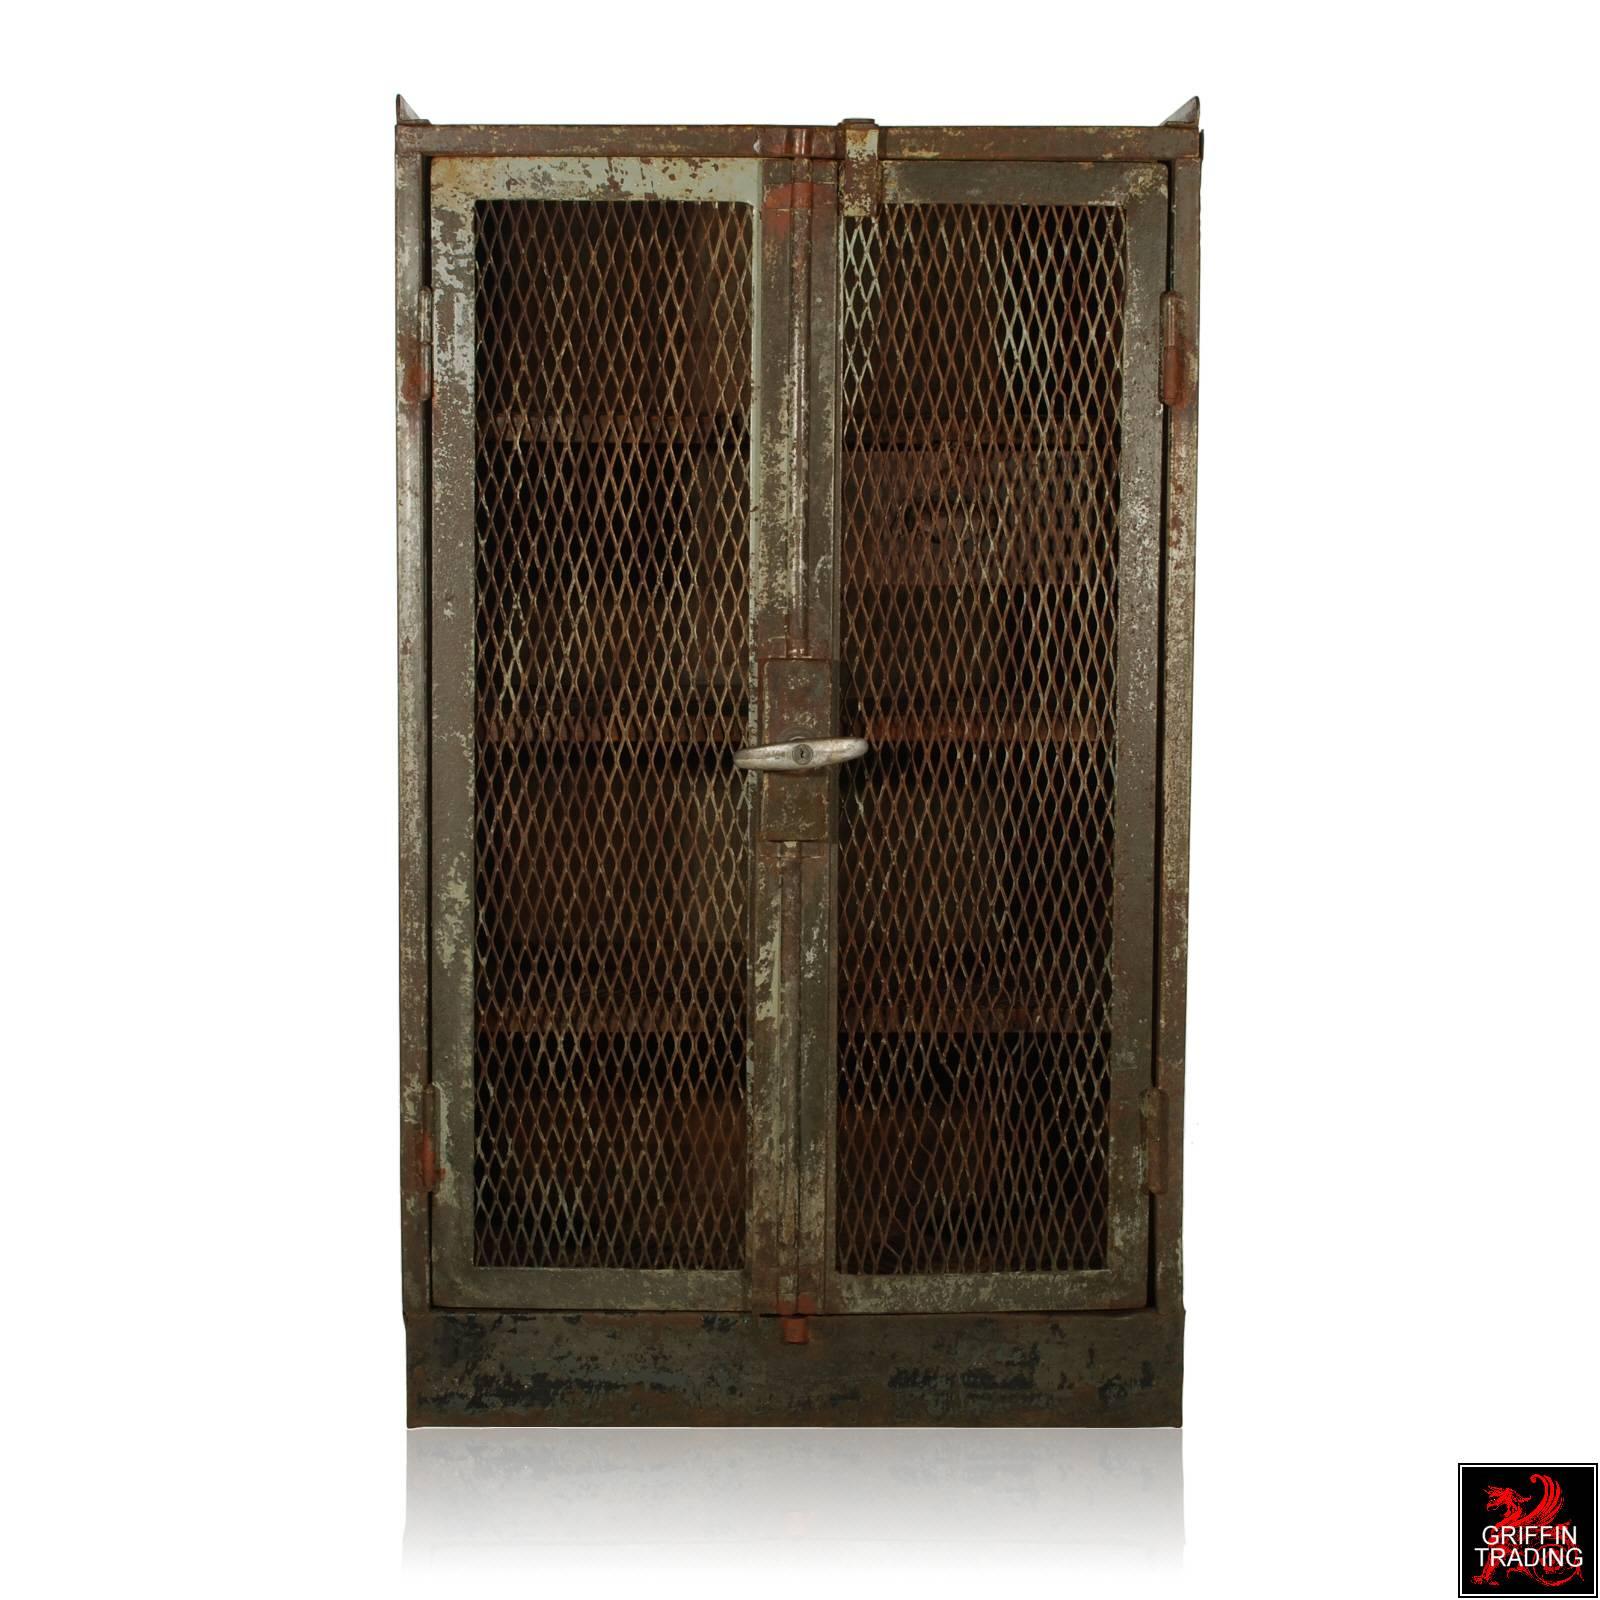 This nice double door steel cabinet is from the French railroad and was used to lock tools and other supplies. The double doors open to three built in shelves and one drawer, perfect for storage. The cabinet has been professional lacquered to keep